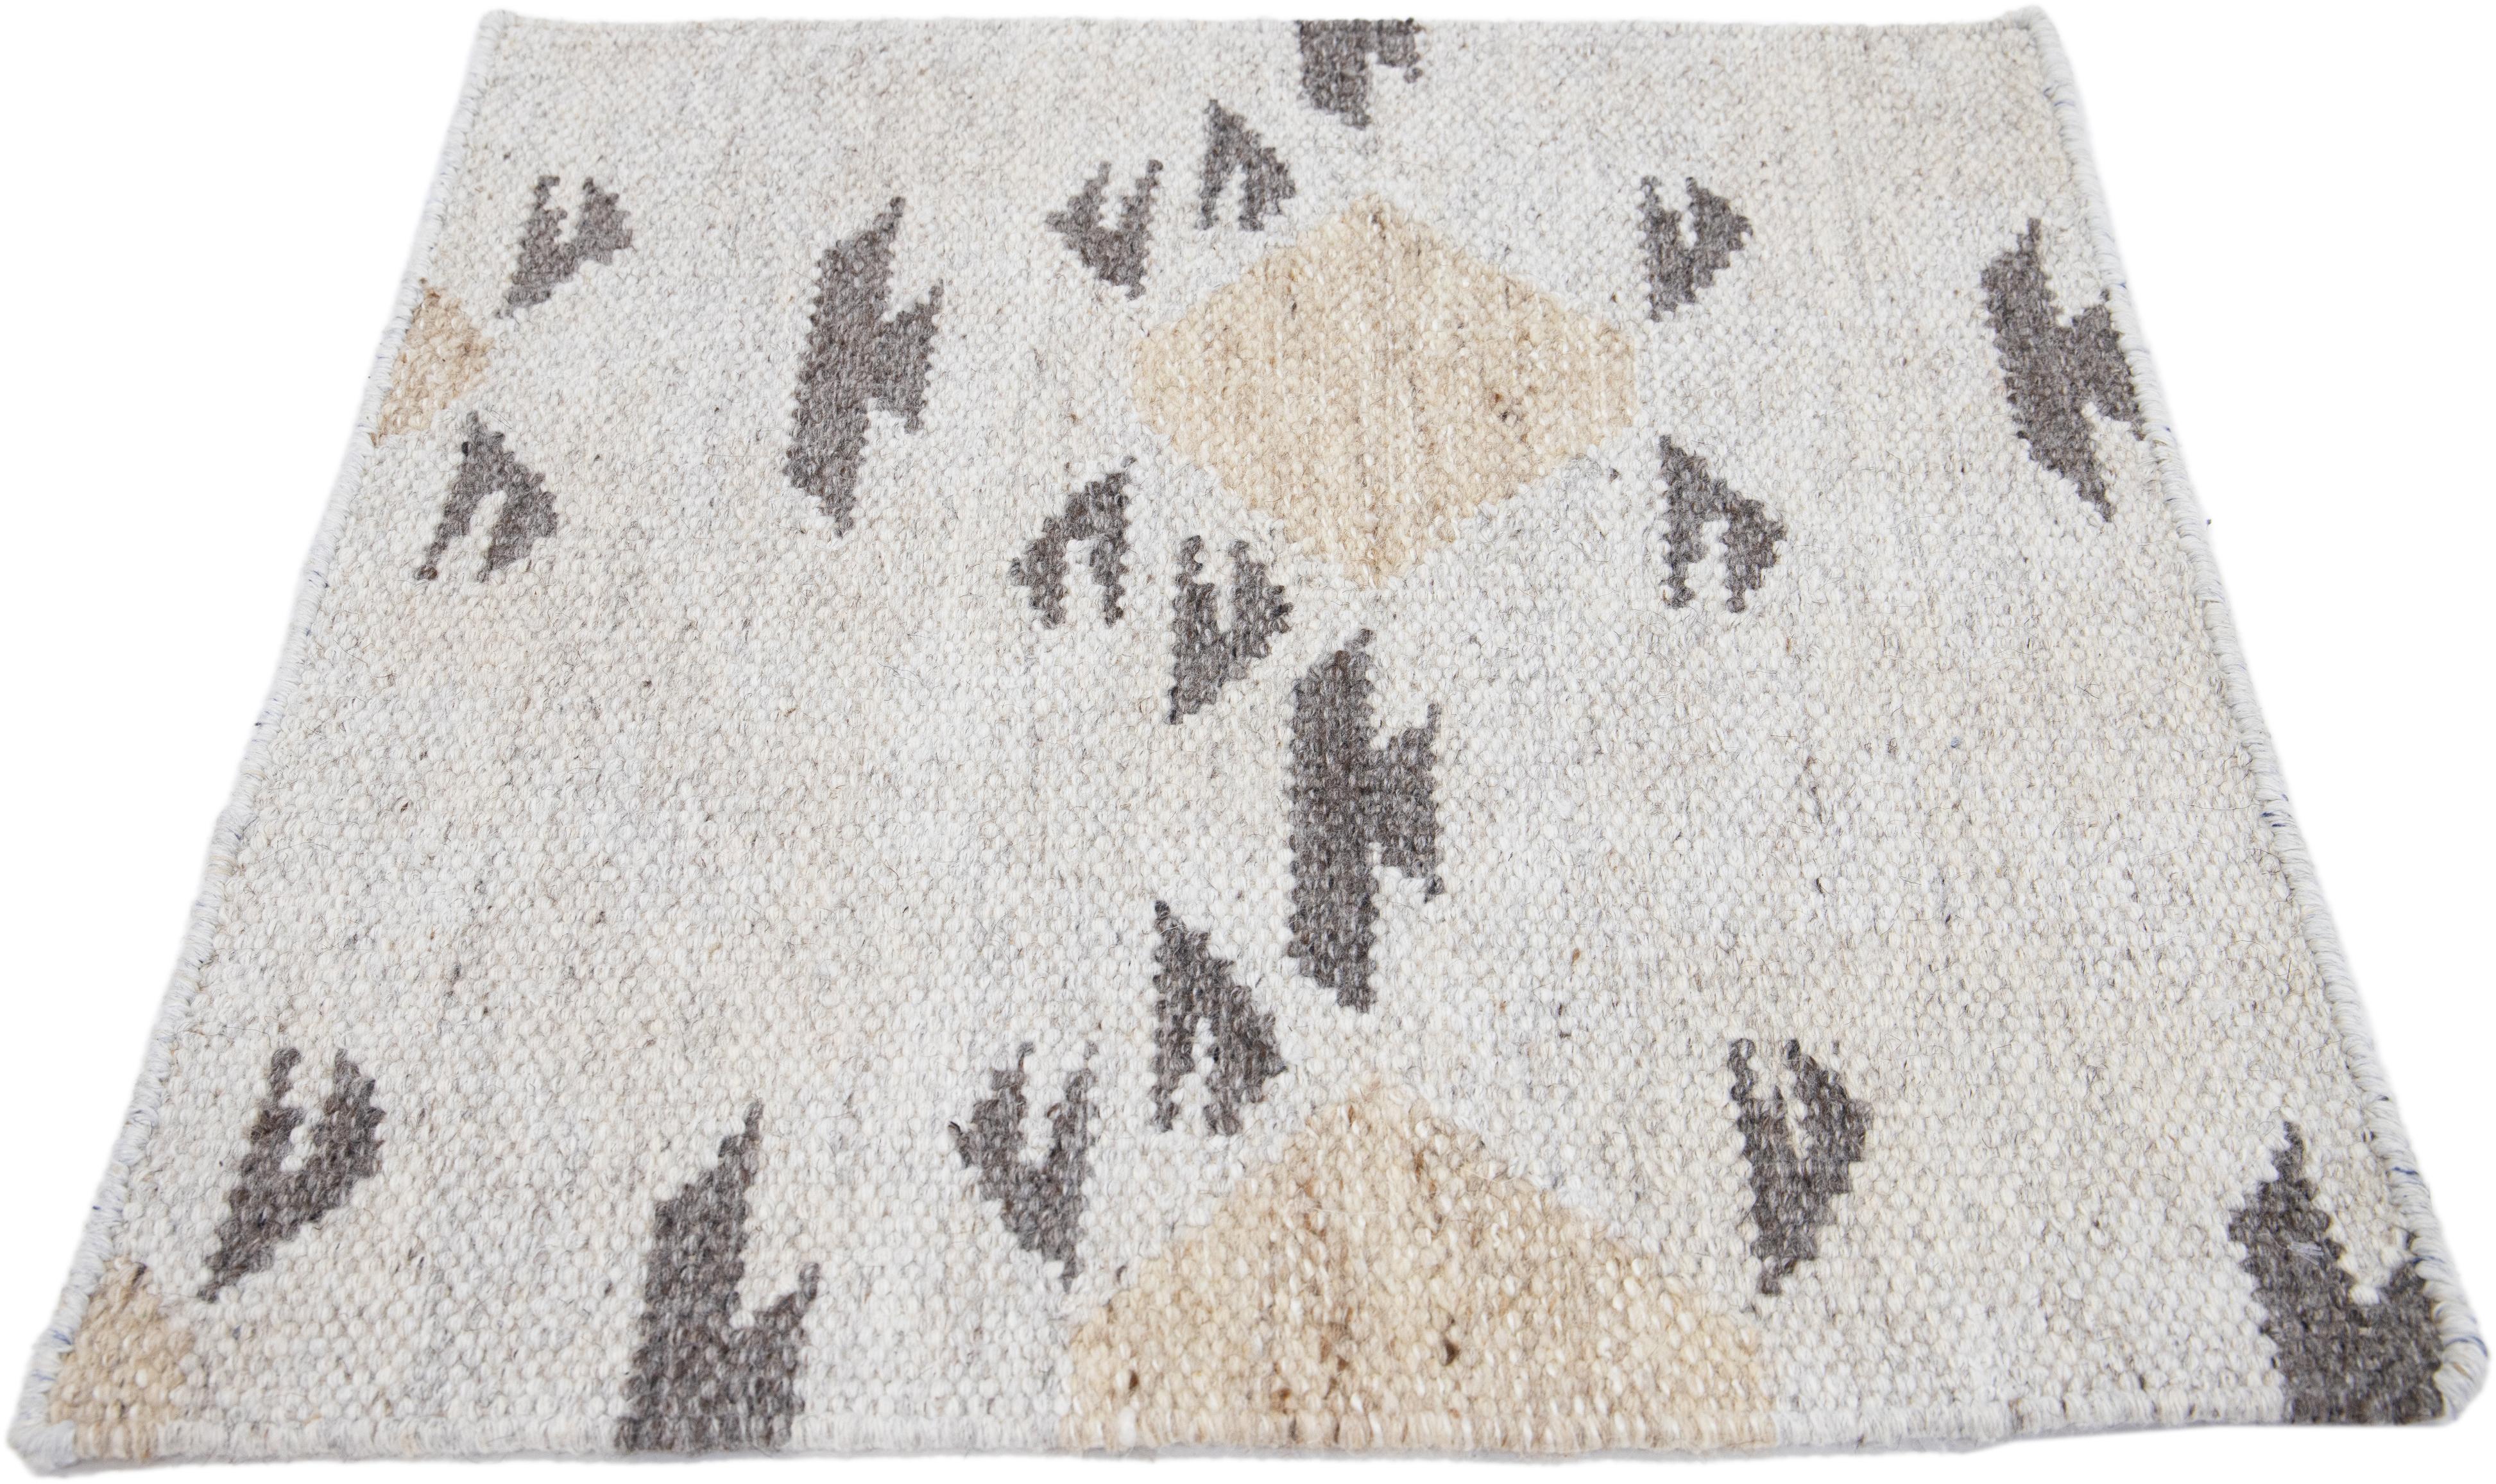 Apadana's Modern Swedish Style Handwoven wool custom rug. Custom sizes and colors made-to-order. 

Material: Wool 
Techniques: Hand-Woven
Style: Swedish
Lead time: Approx. 15-16 wks available 
Colors: As shown, other custom colors are